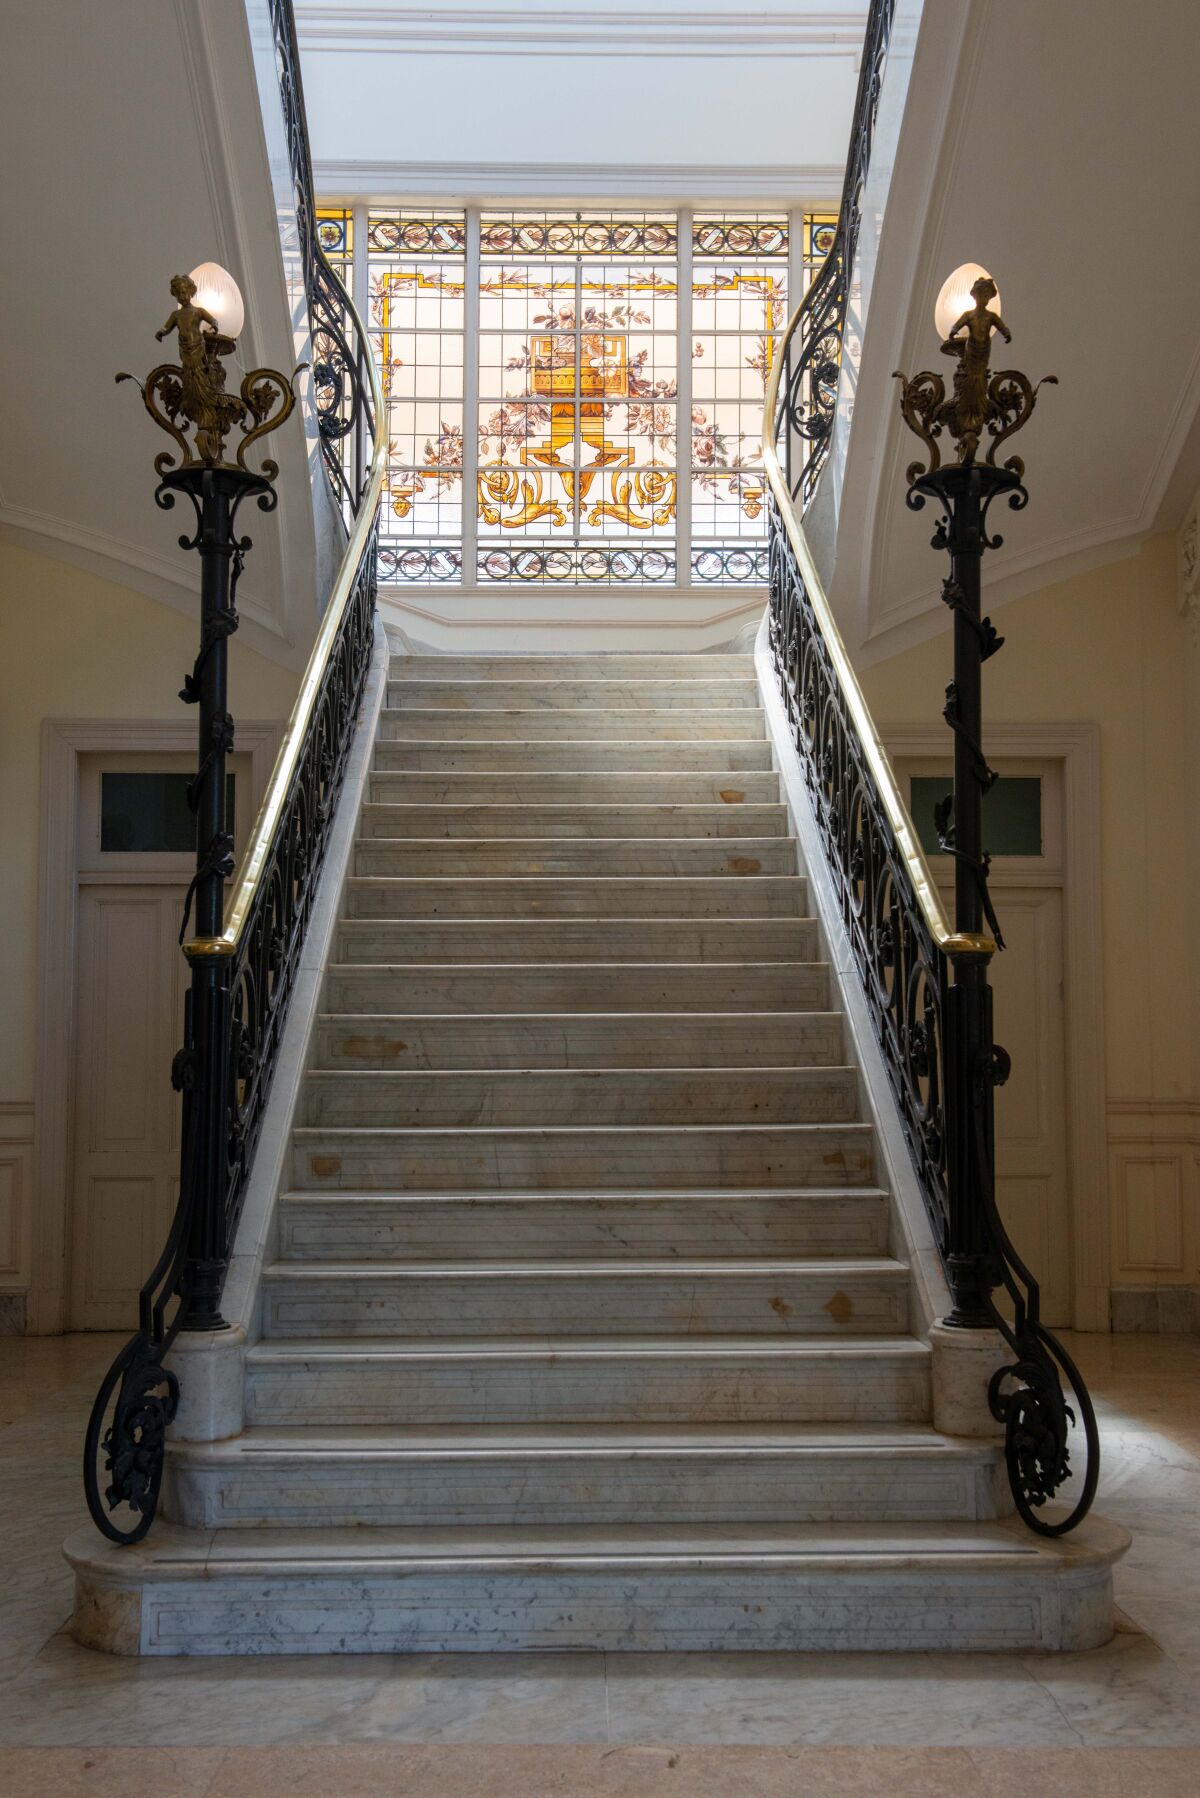 The Tigre Art Museum's long Carrara marble staircase is seen with a stained-glass window at the top.